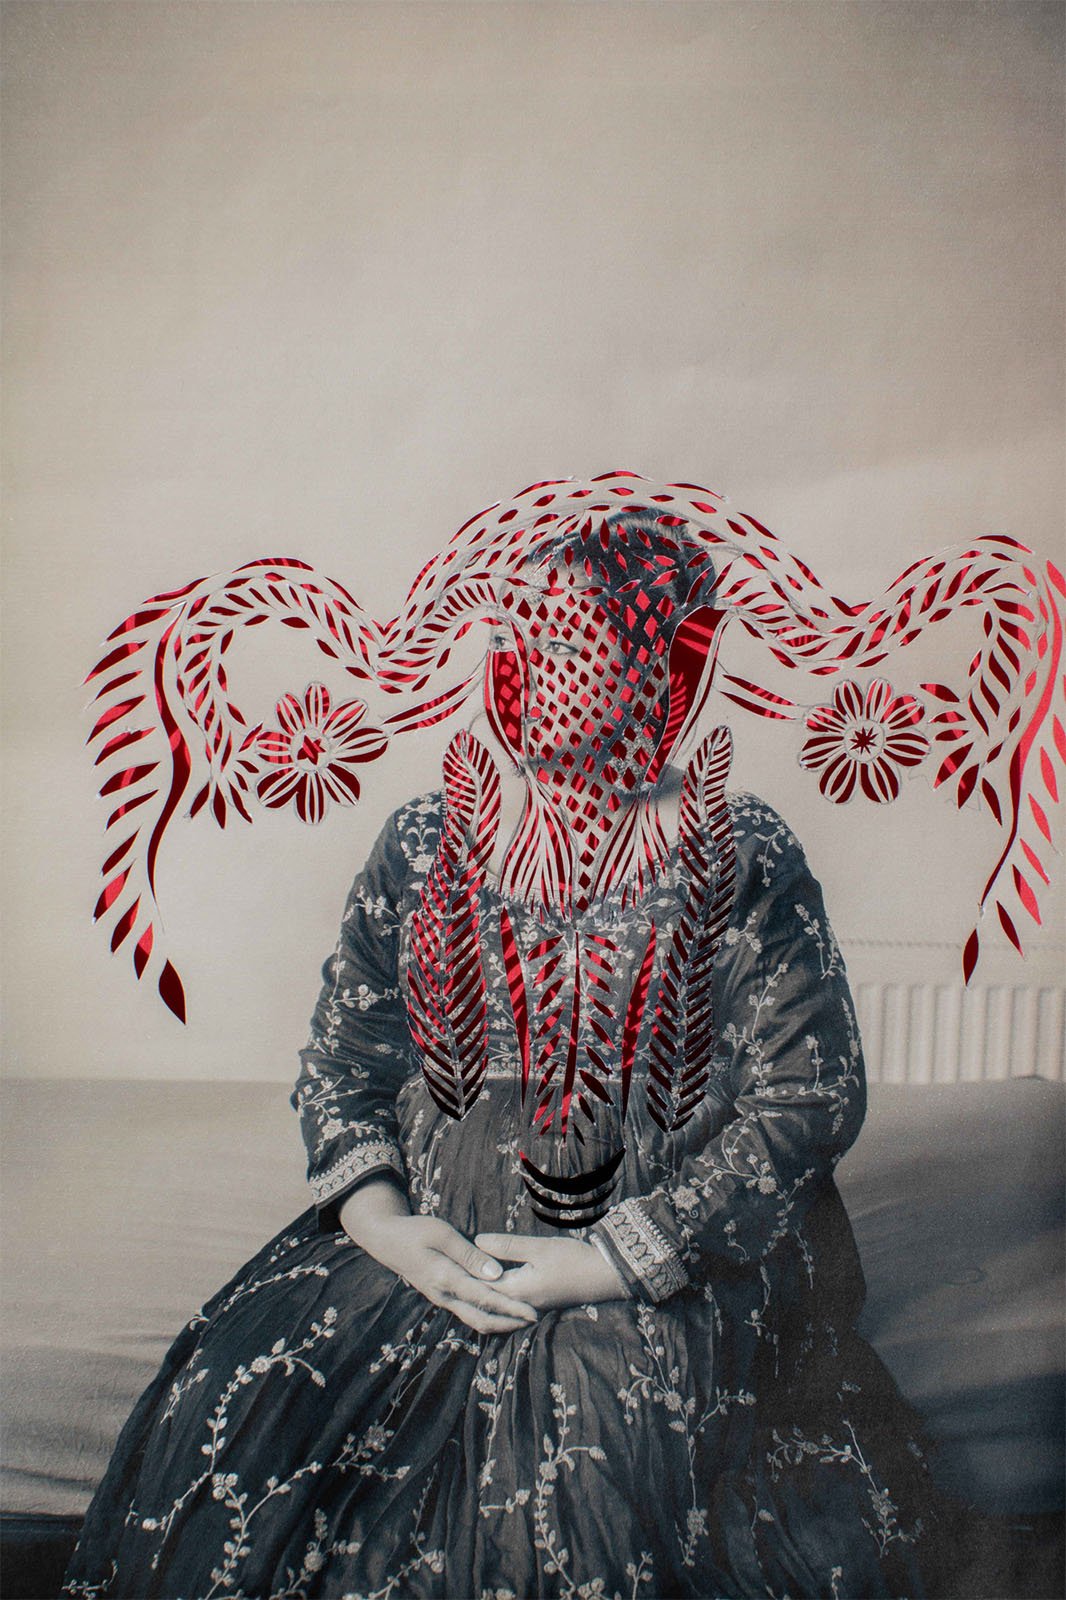 A surreal black and white photograph of a person sitting, wearing a detailed patterned headdress with octopus-like tendrils and intricate designs, giving an artistic and mysterious vibe.